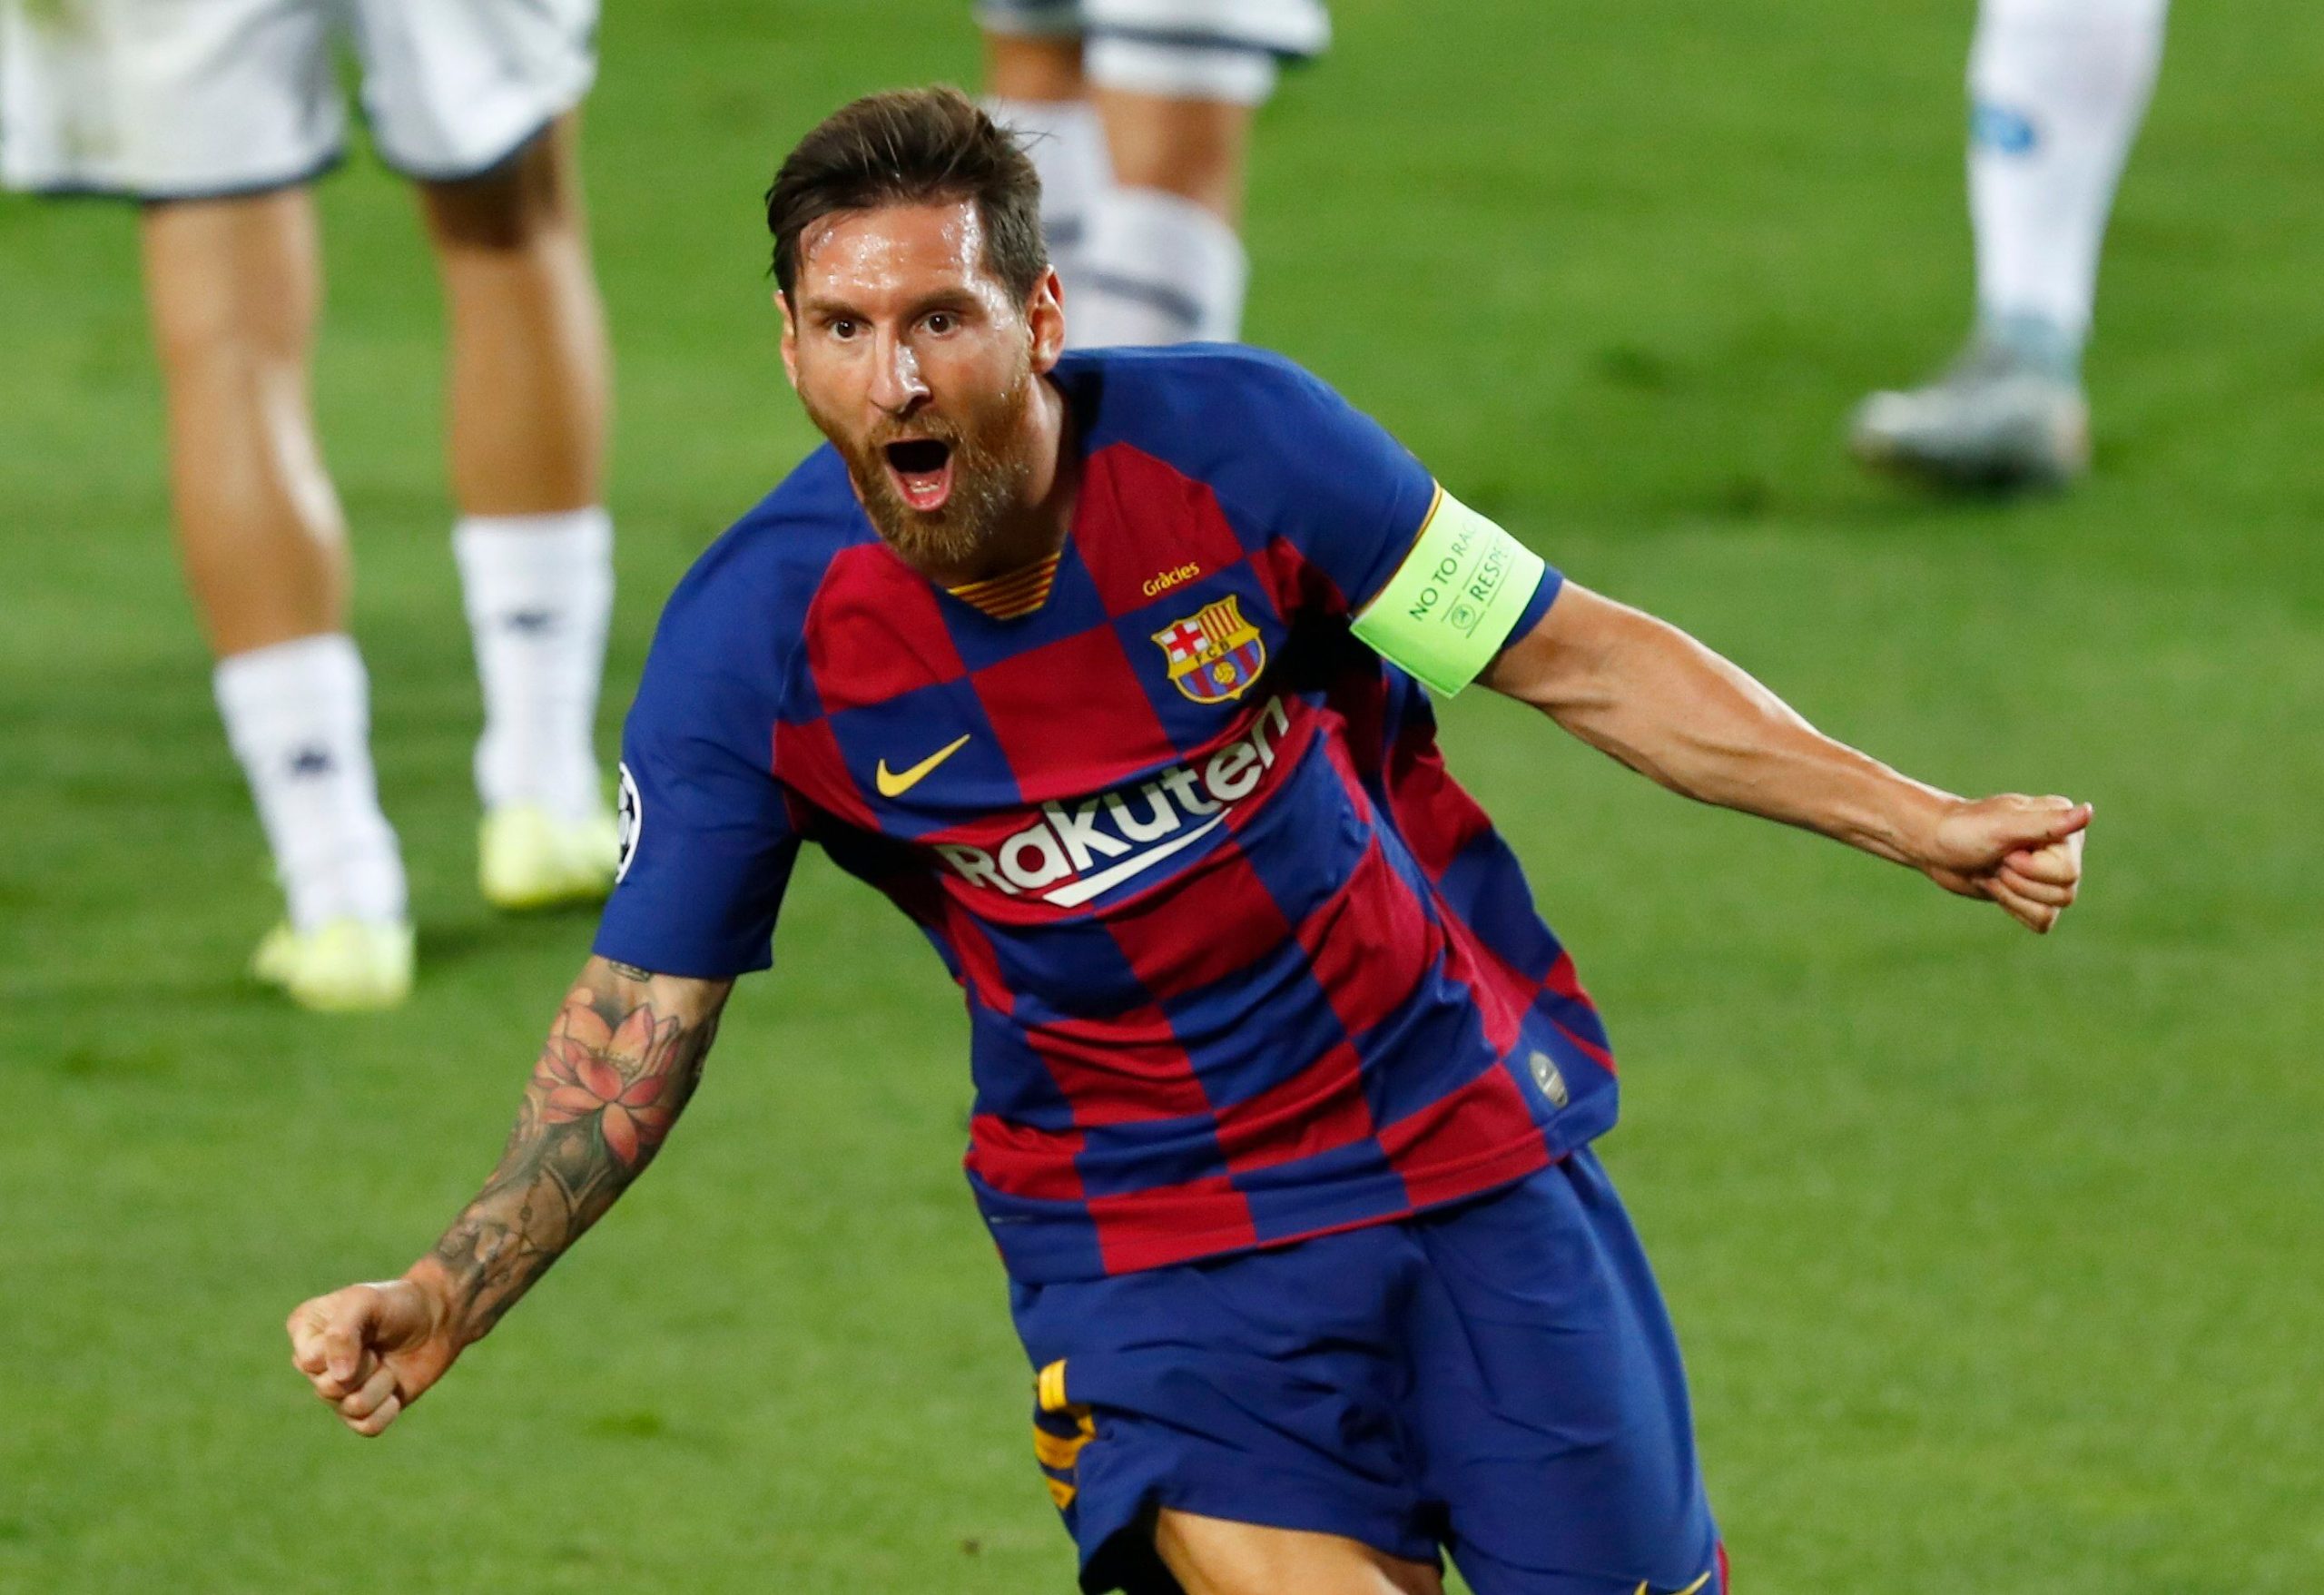 Lionel Messi skips training, club director says Barcelona wants ‘winner’ to stay